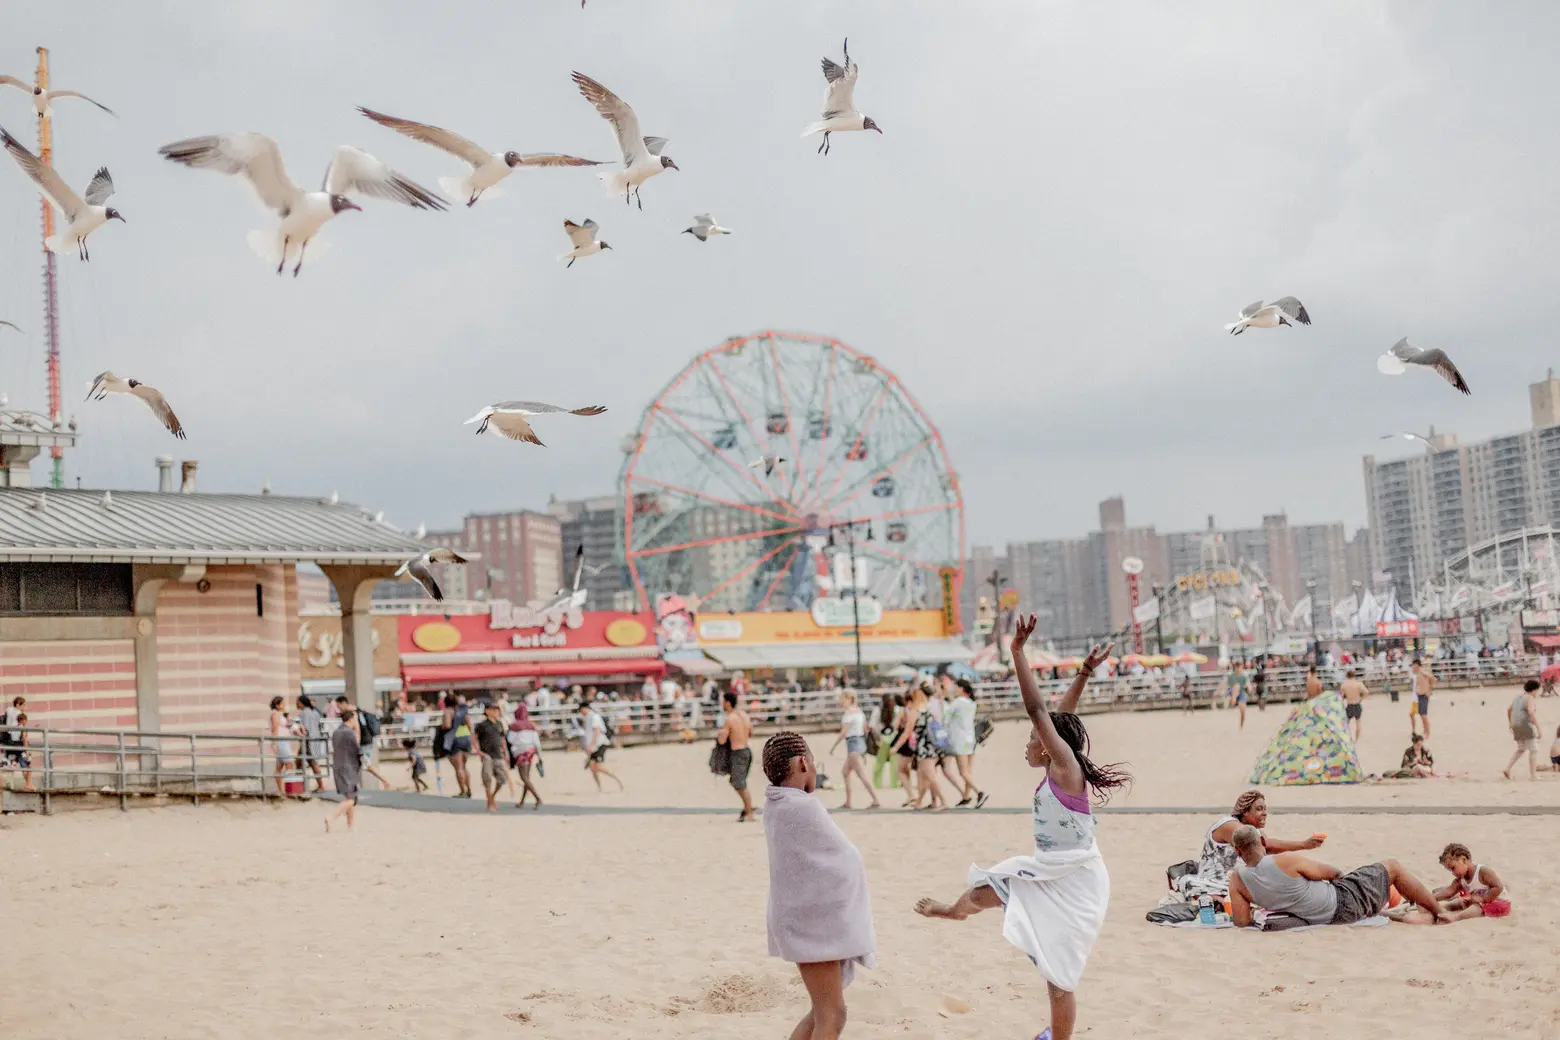 NYC beaches may be closed for the summer